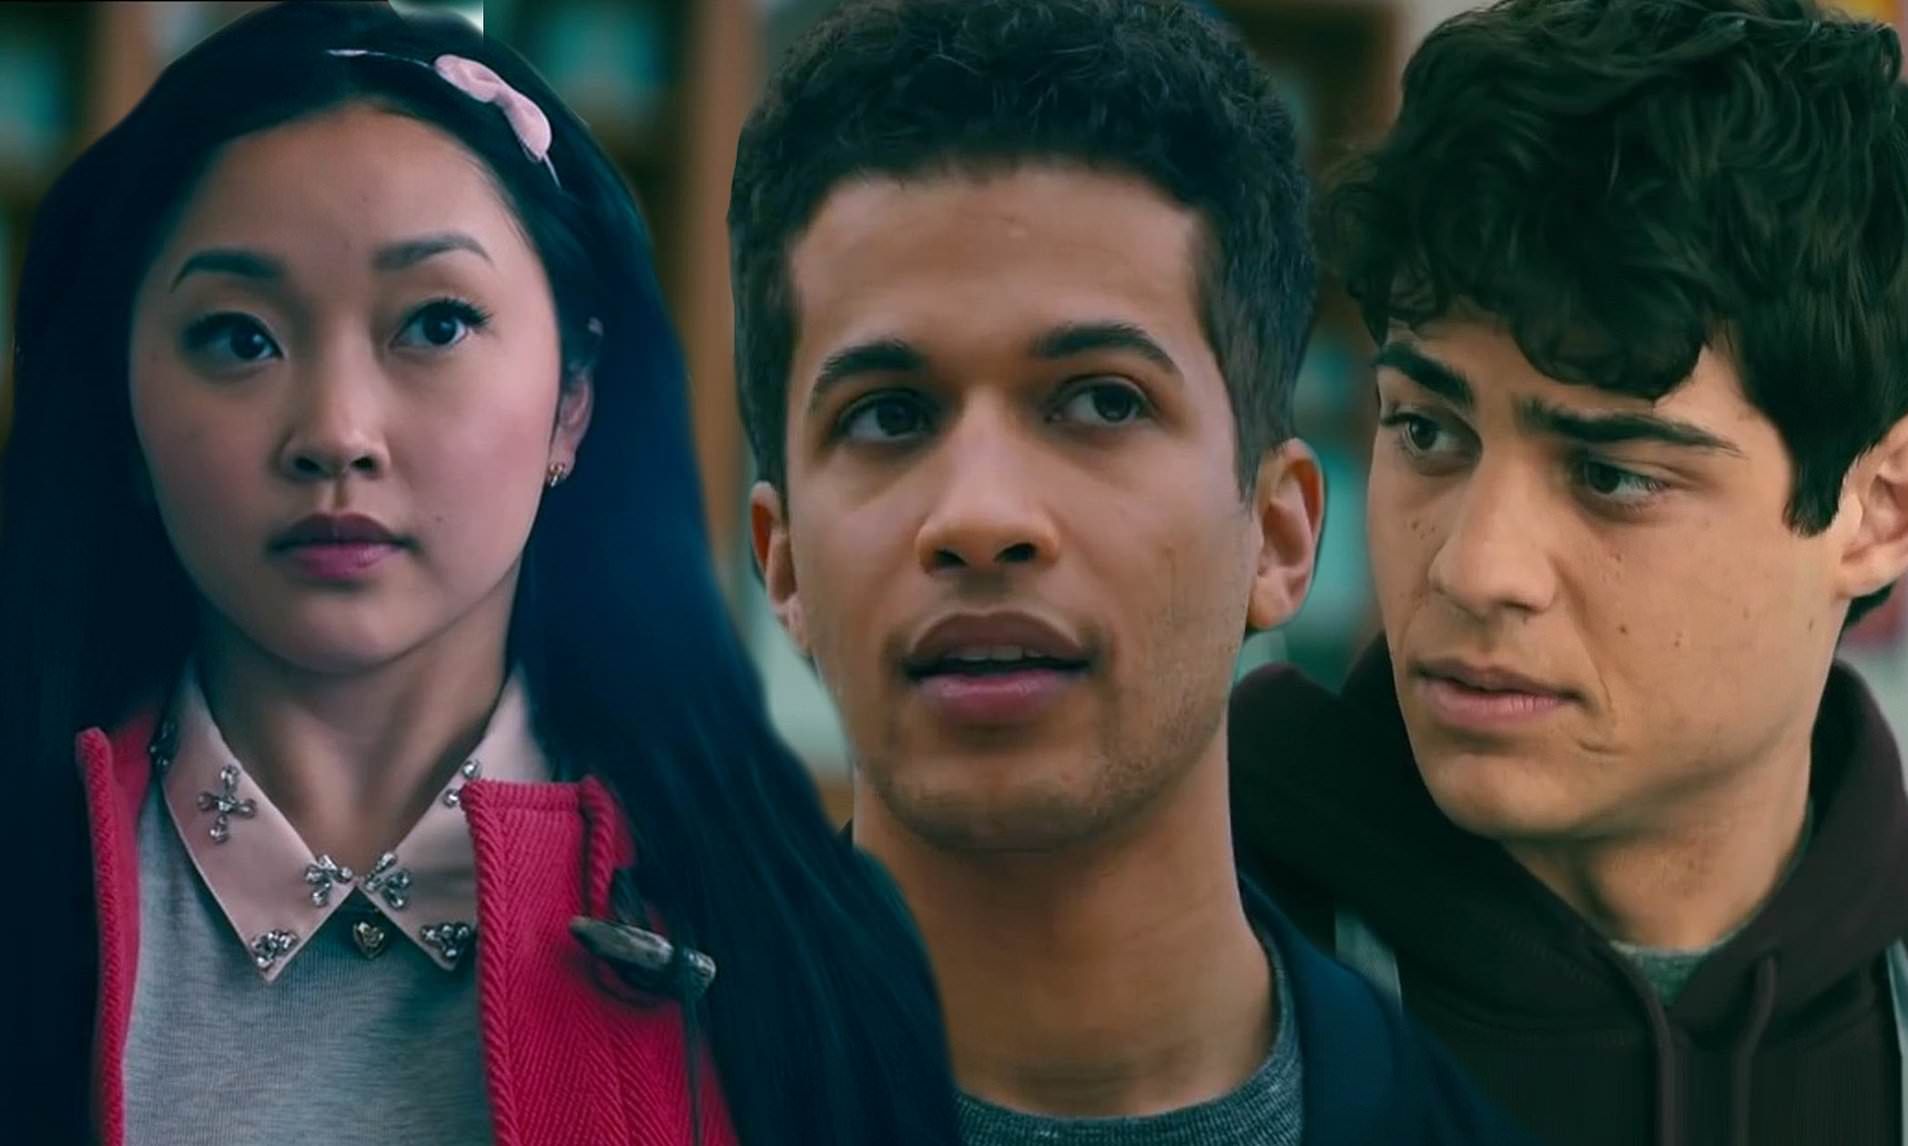 To All the Boys I've Loved Before 2: 5 Burning Questions We Have After the Netflix Movie - To All the Boys I've Loved